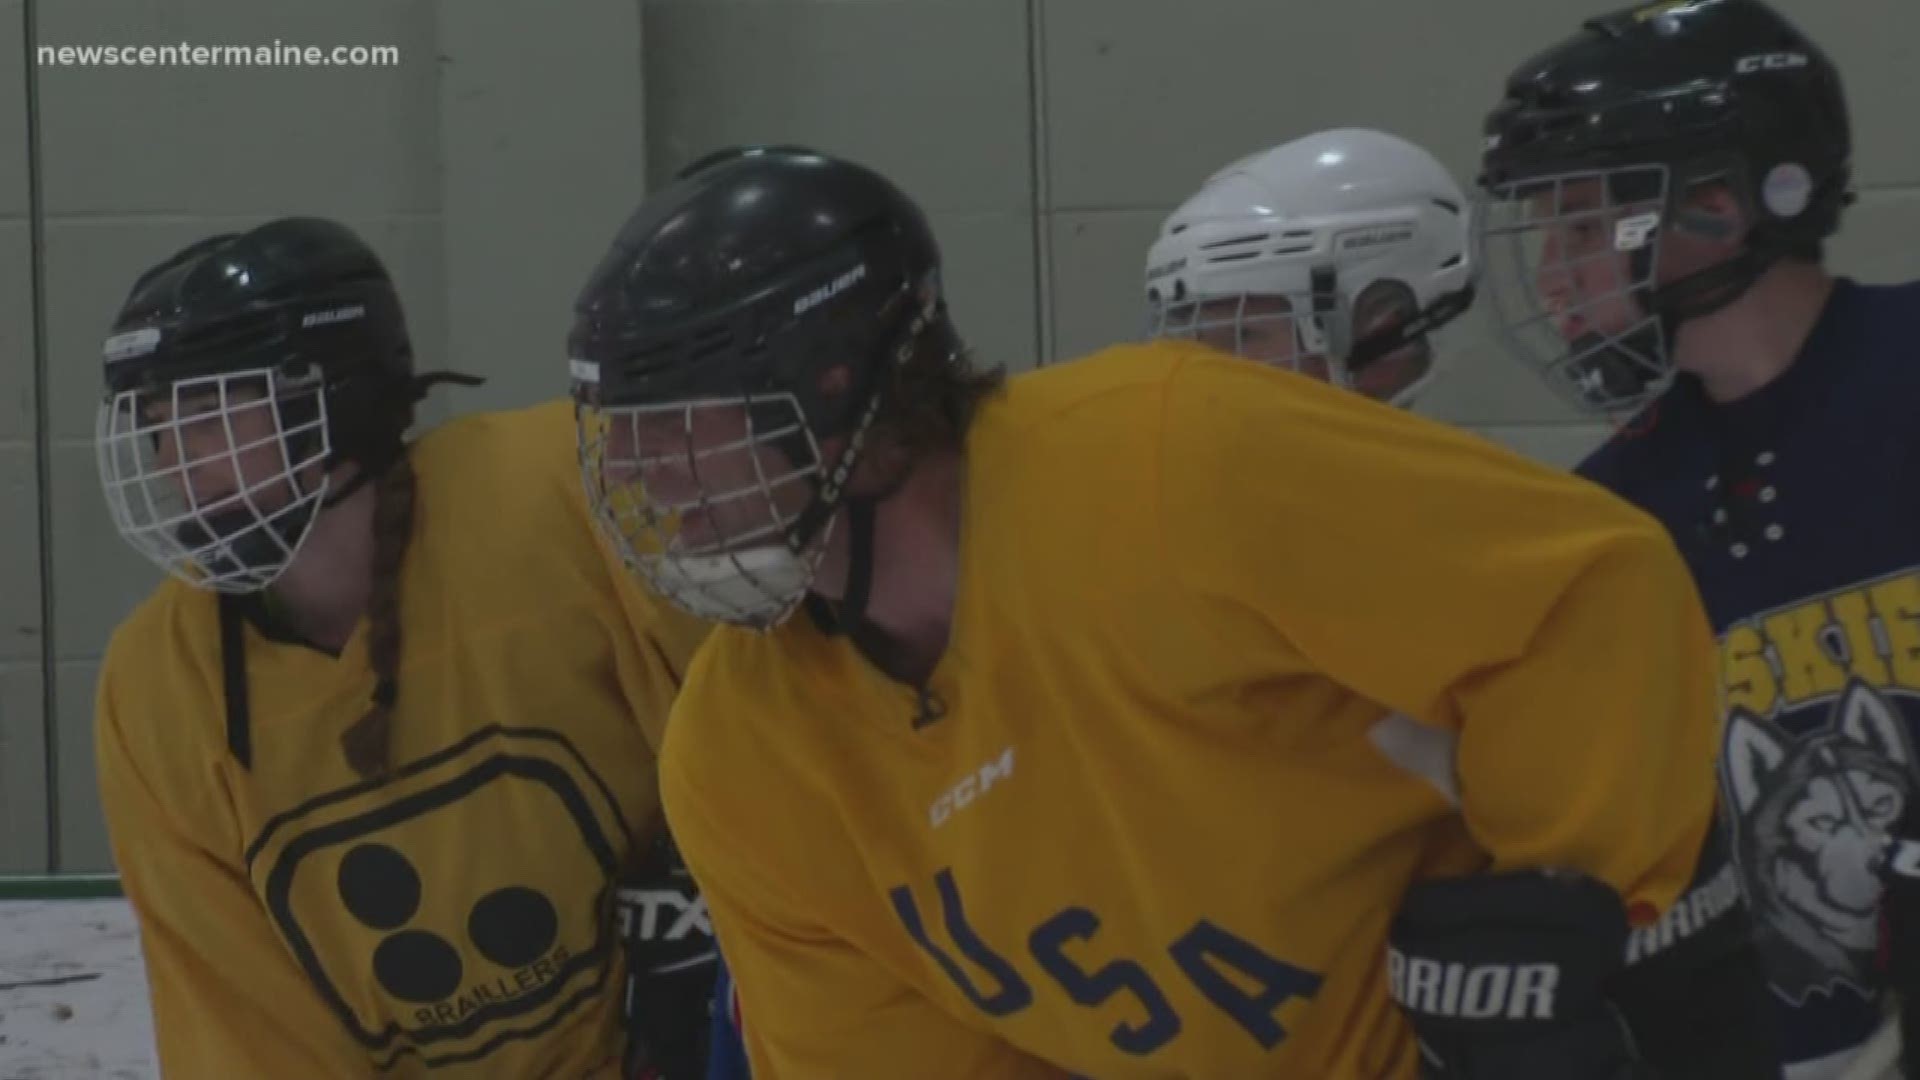 A group of visually impaired hockey players have formed a blind hockey team called Maine Blind Bears at Family Ice Center in Falmouth.